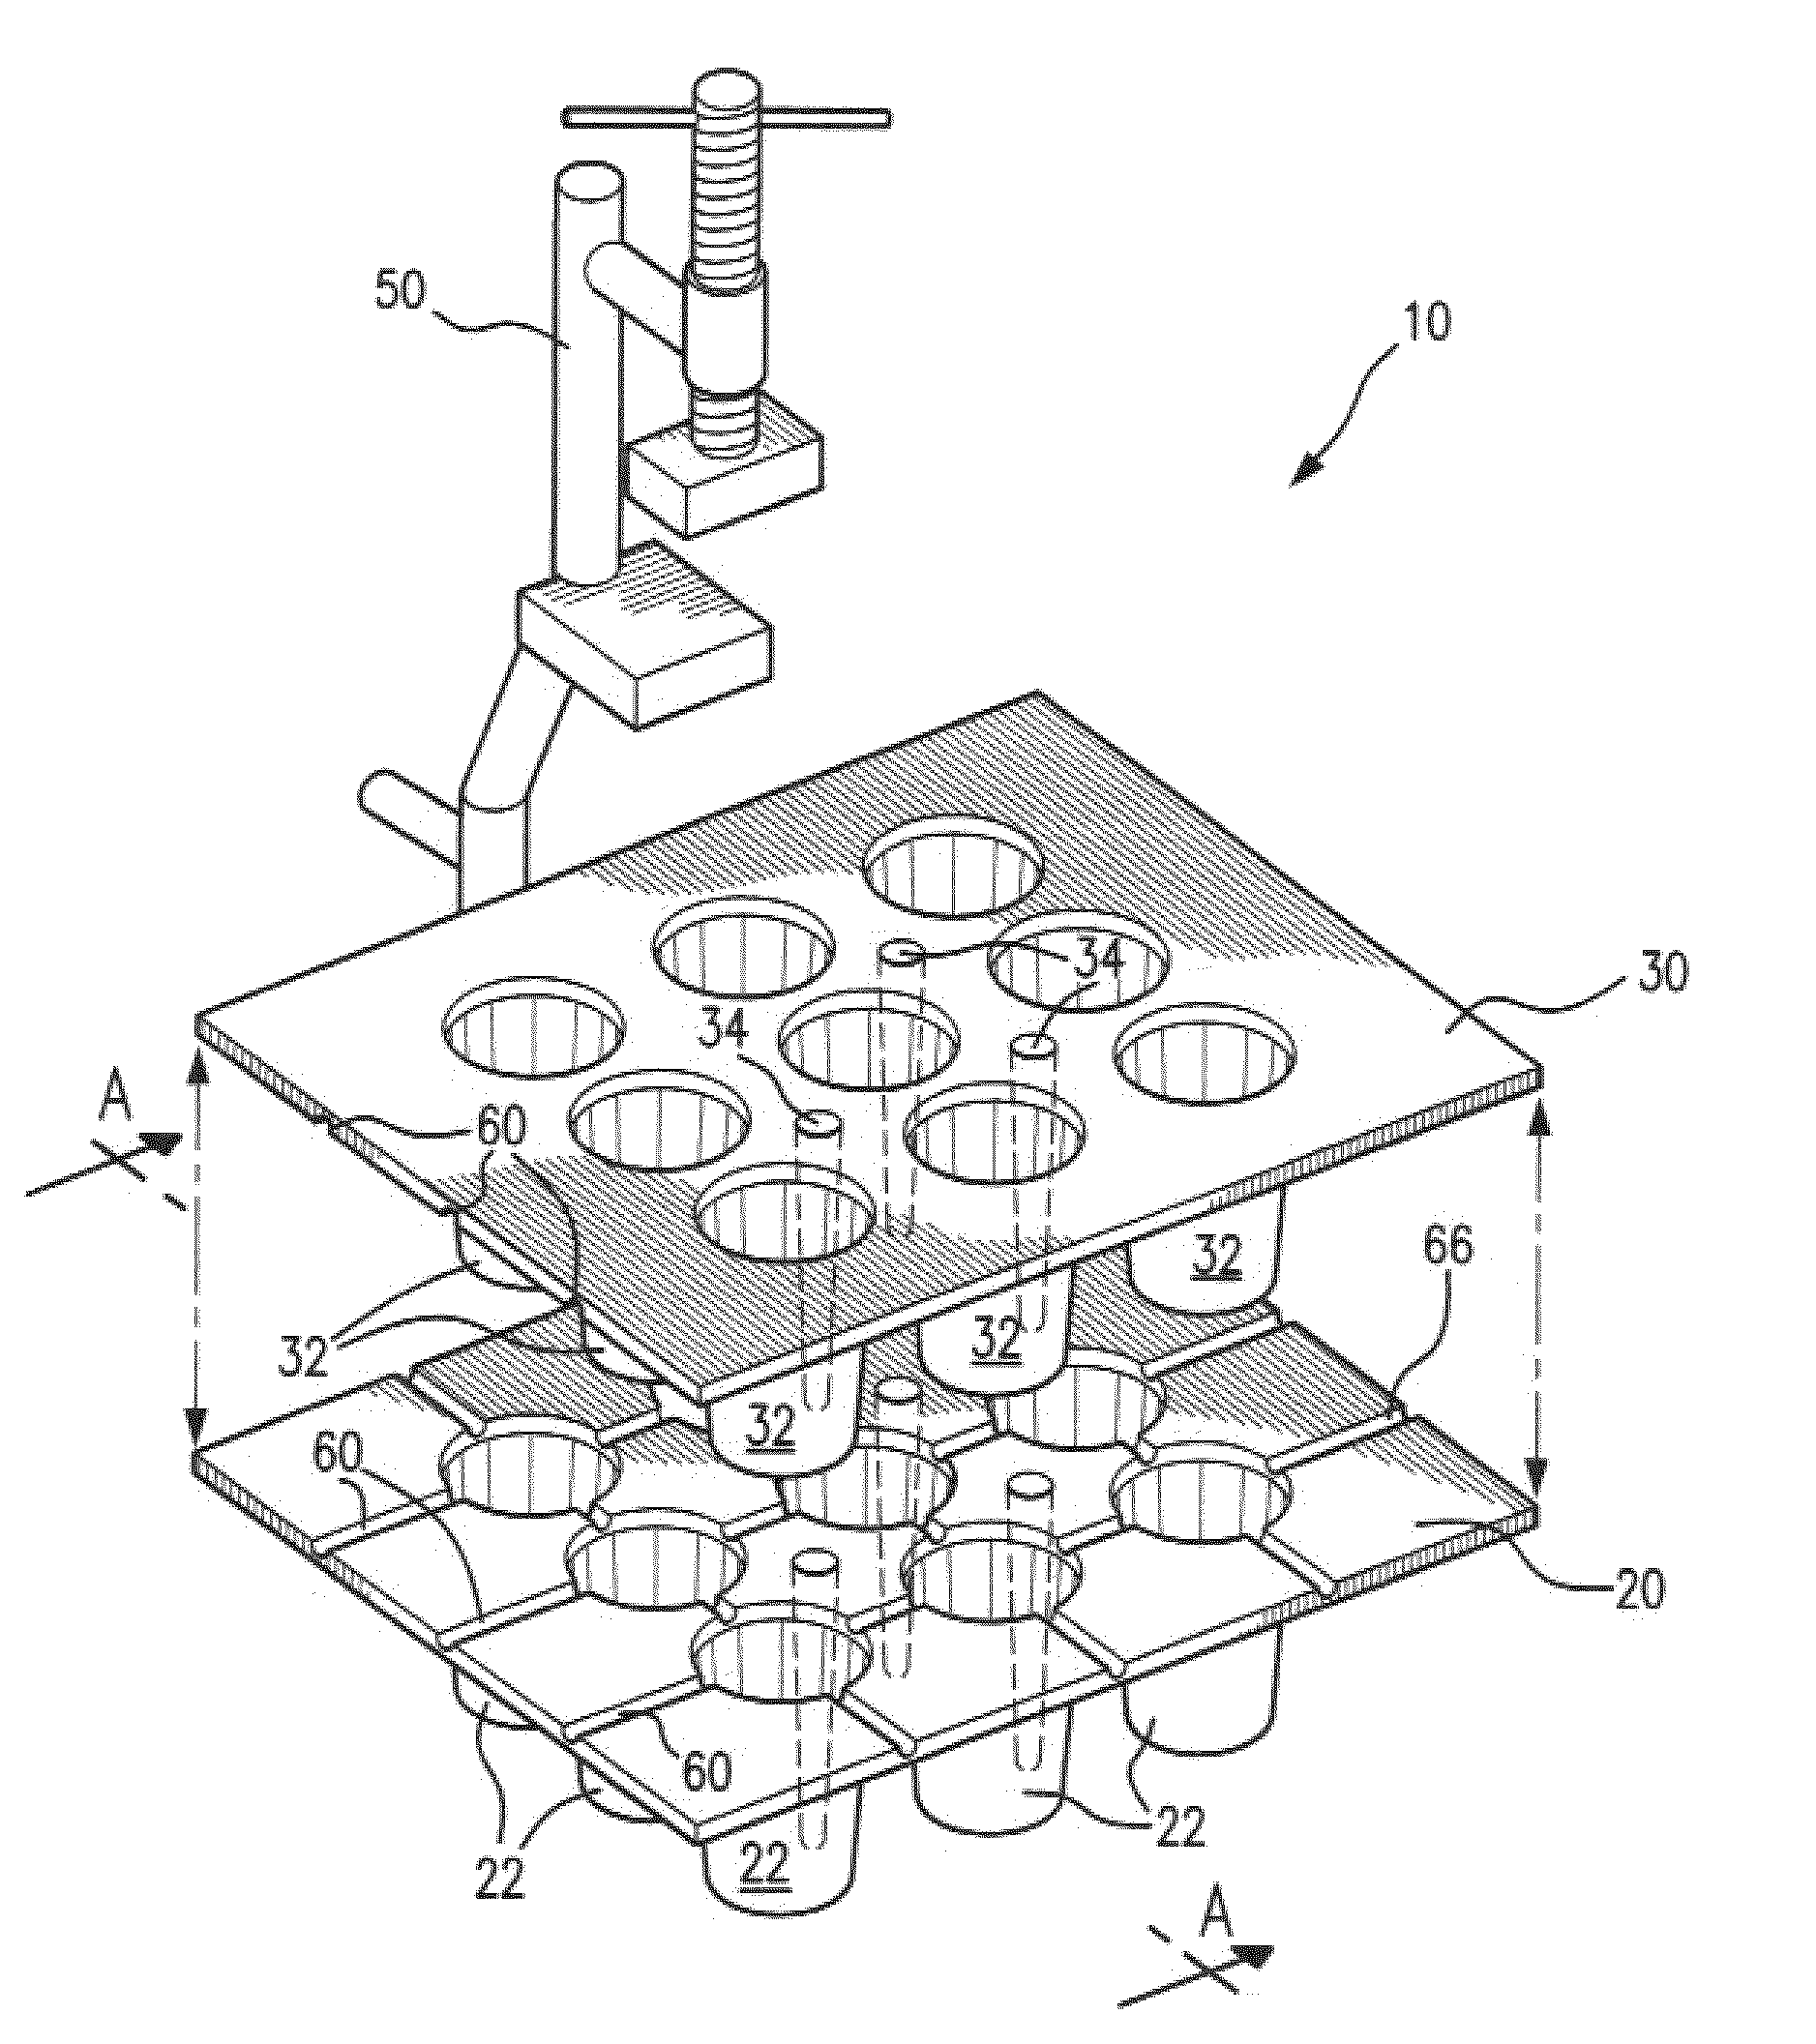 Edible bread cup and method of production